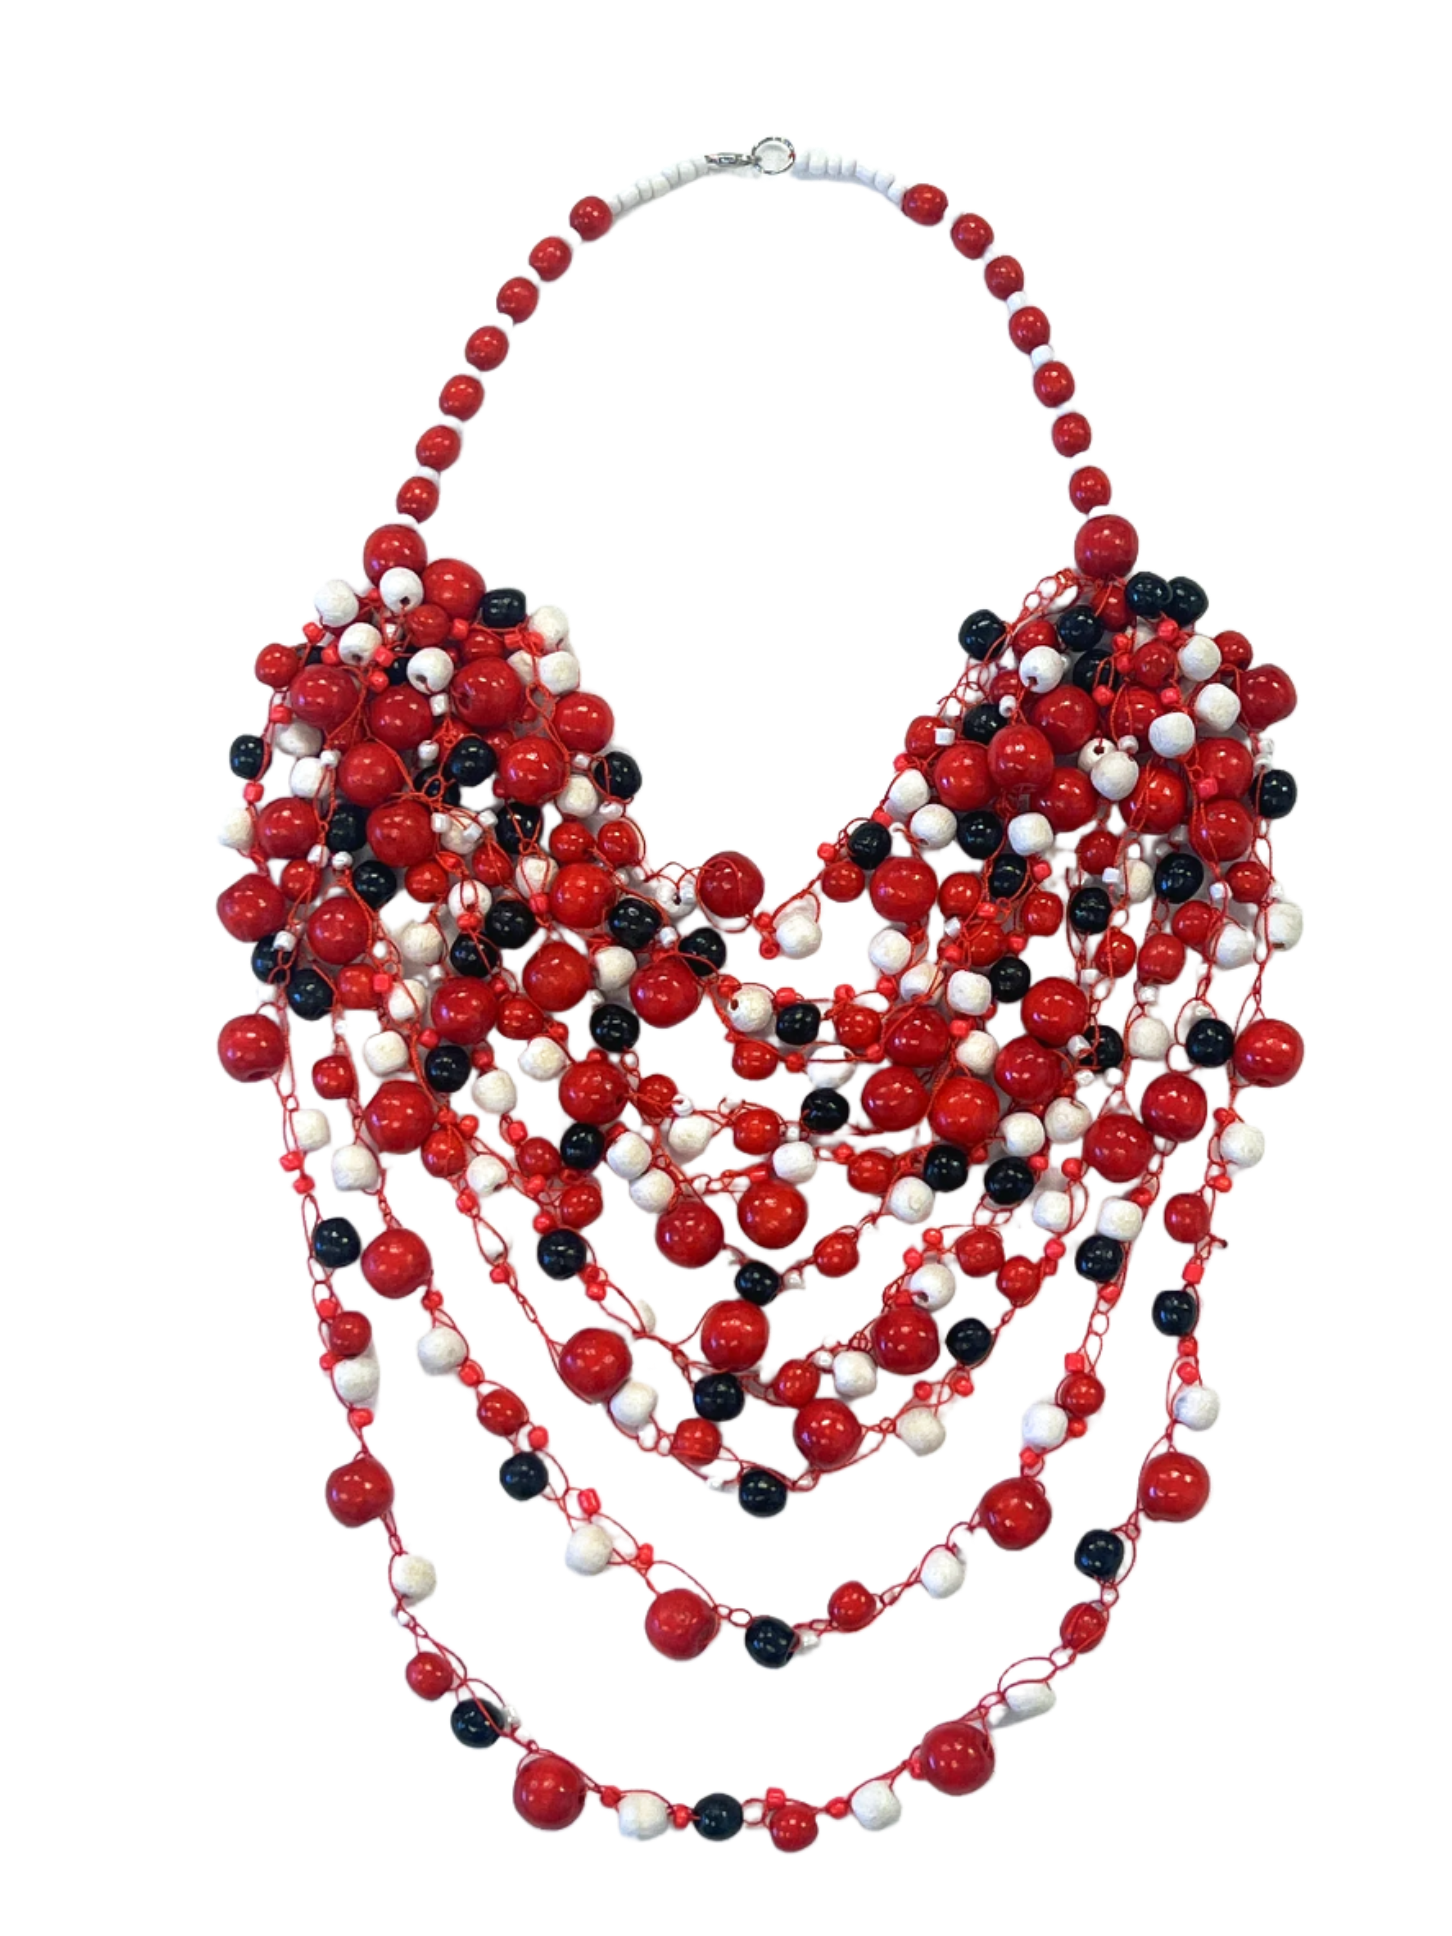 Artisan crafted woven glass and wood bead necklace. Red, white, black